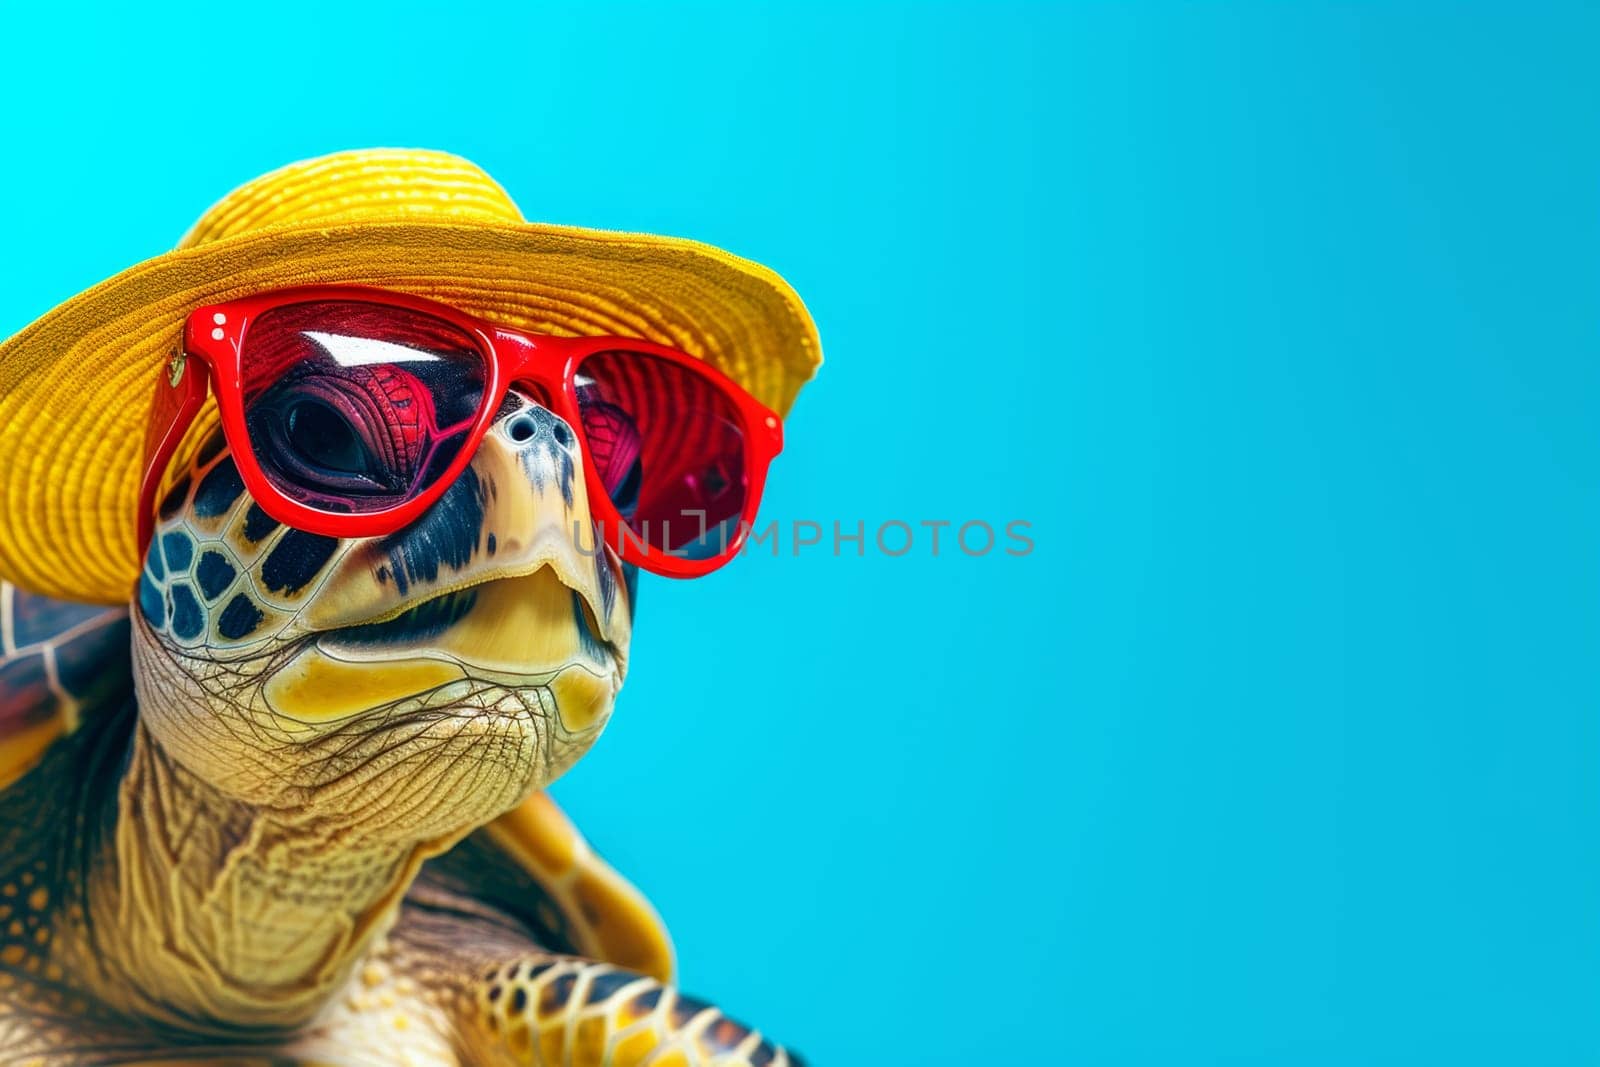 A turtle wearing glasses and a hat is relaxing on a tropical beach.